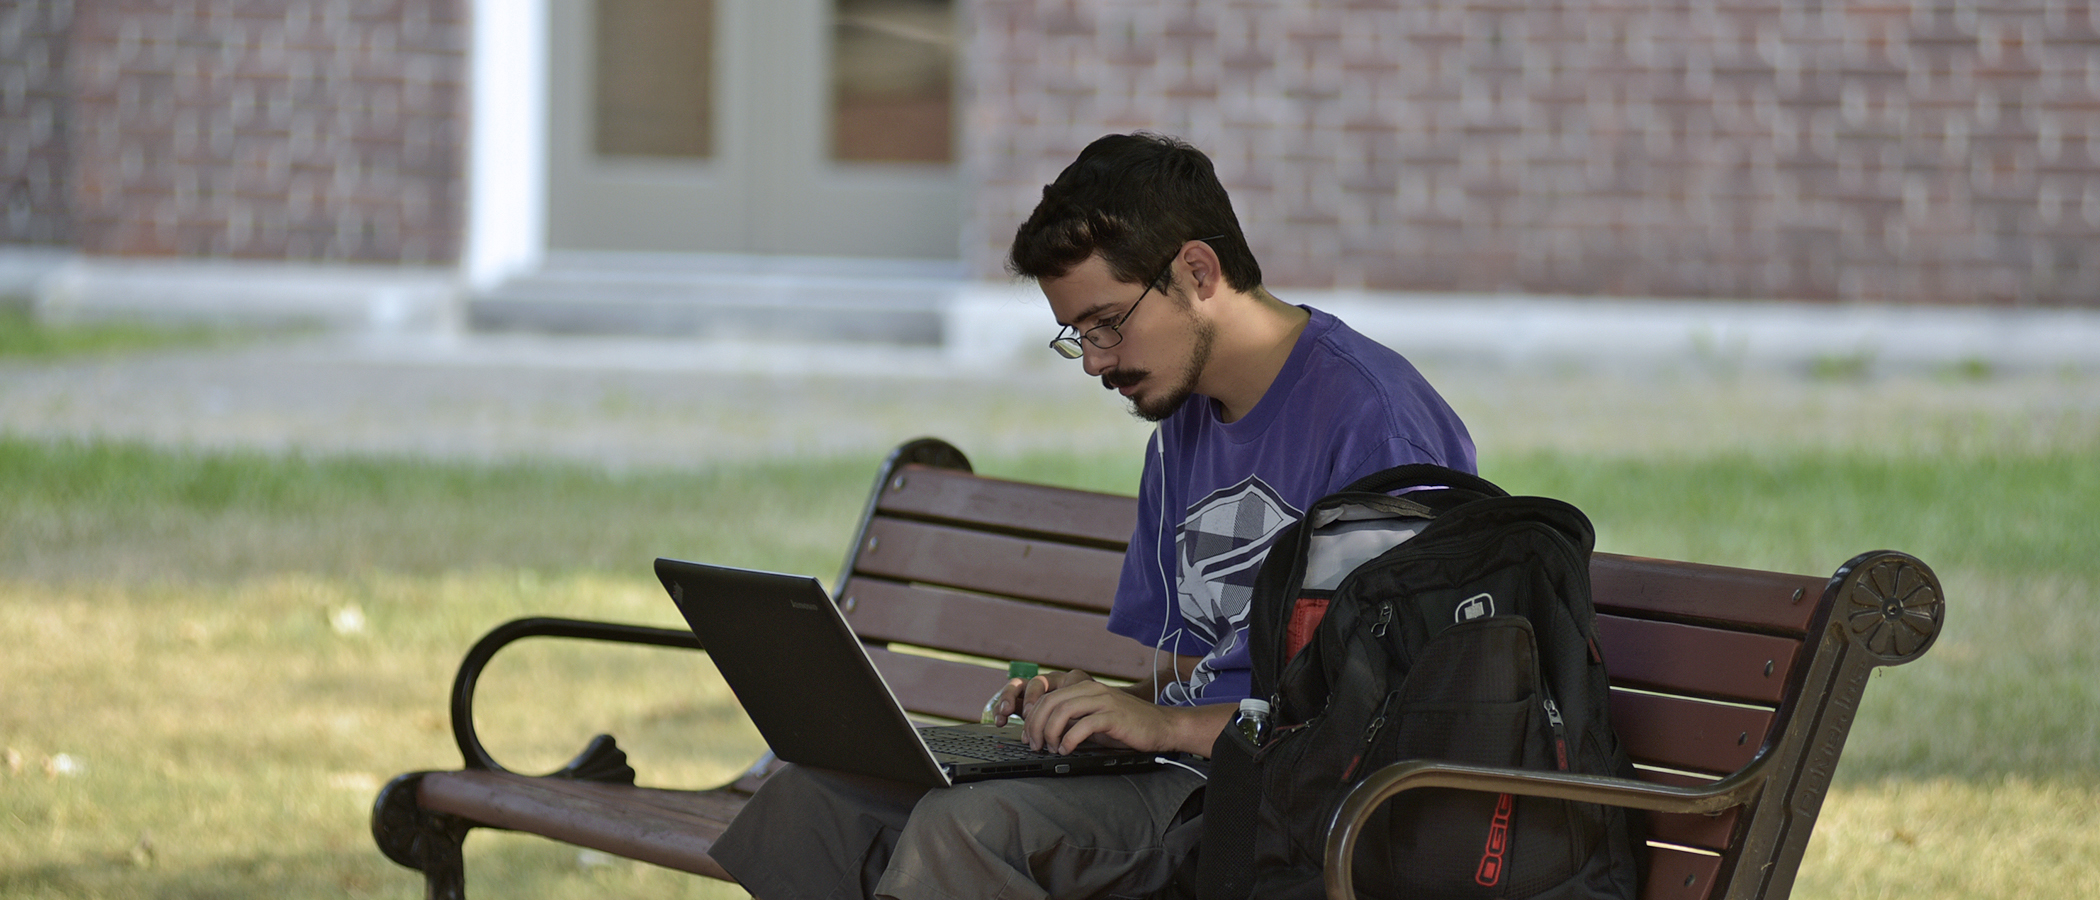 student working on laptop on an outdoor bench